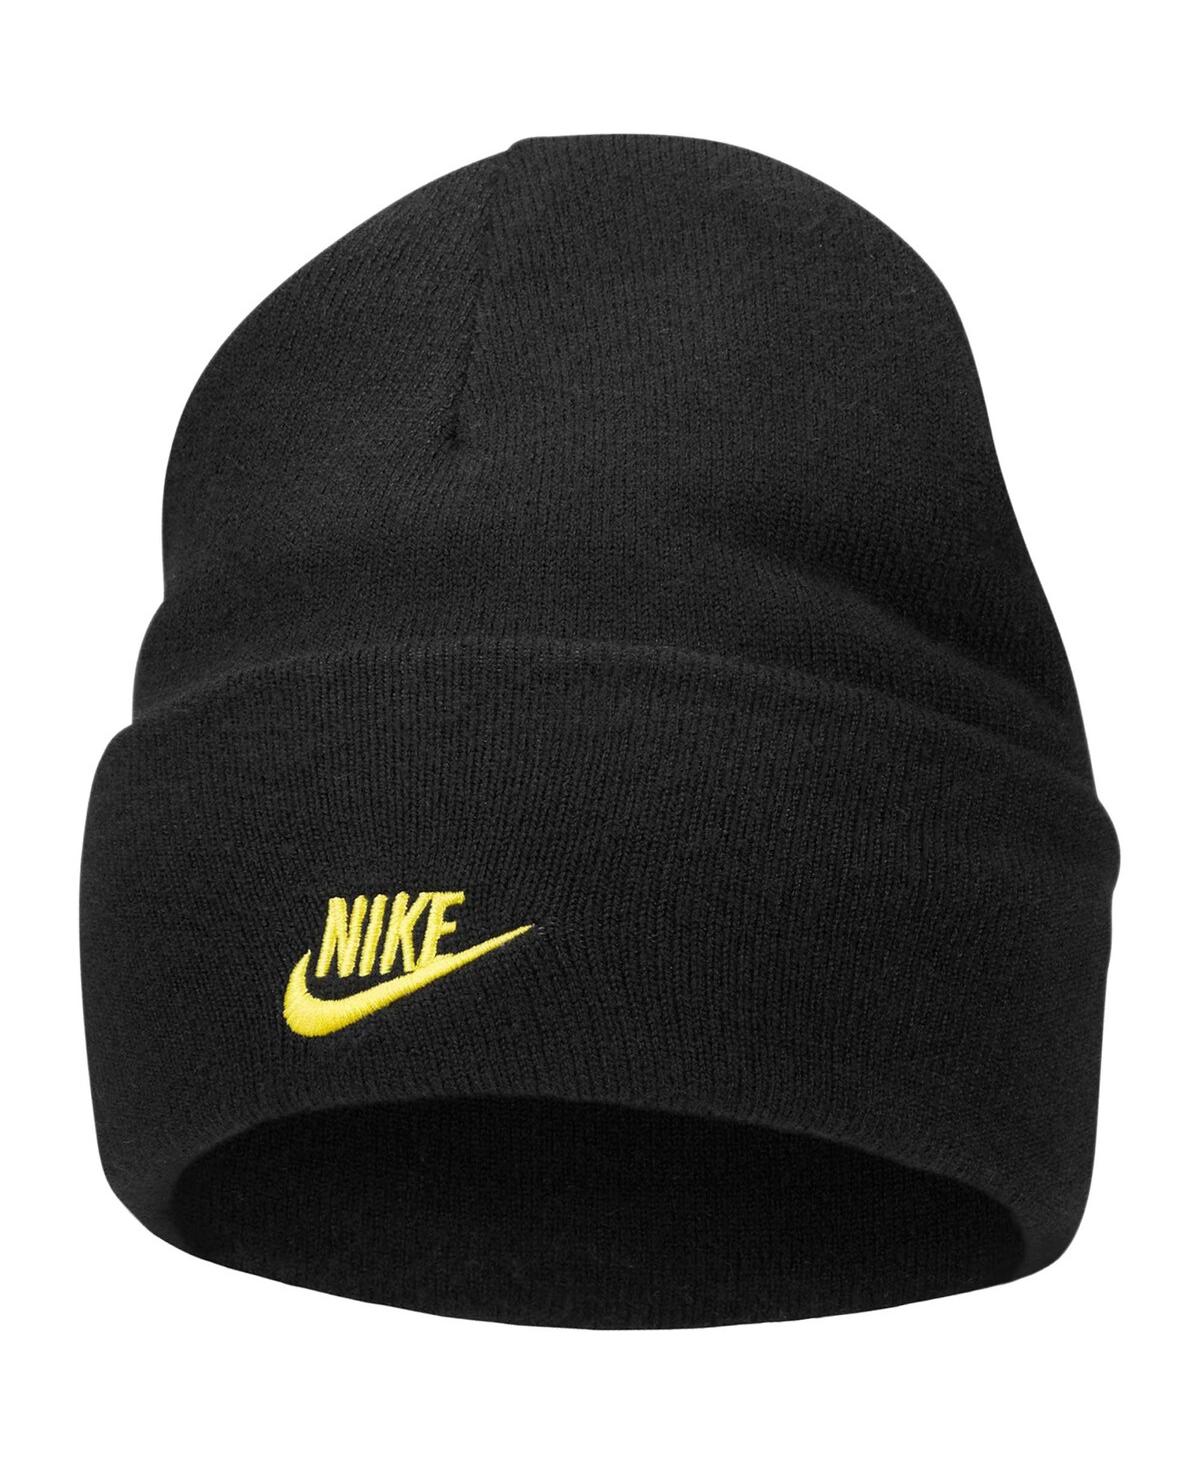 Nike Kids' Youth Boys And Girls  Black Reversible Smiley Tall Peak Cuffed Knit Hat